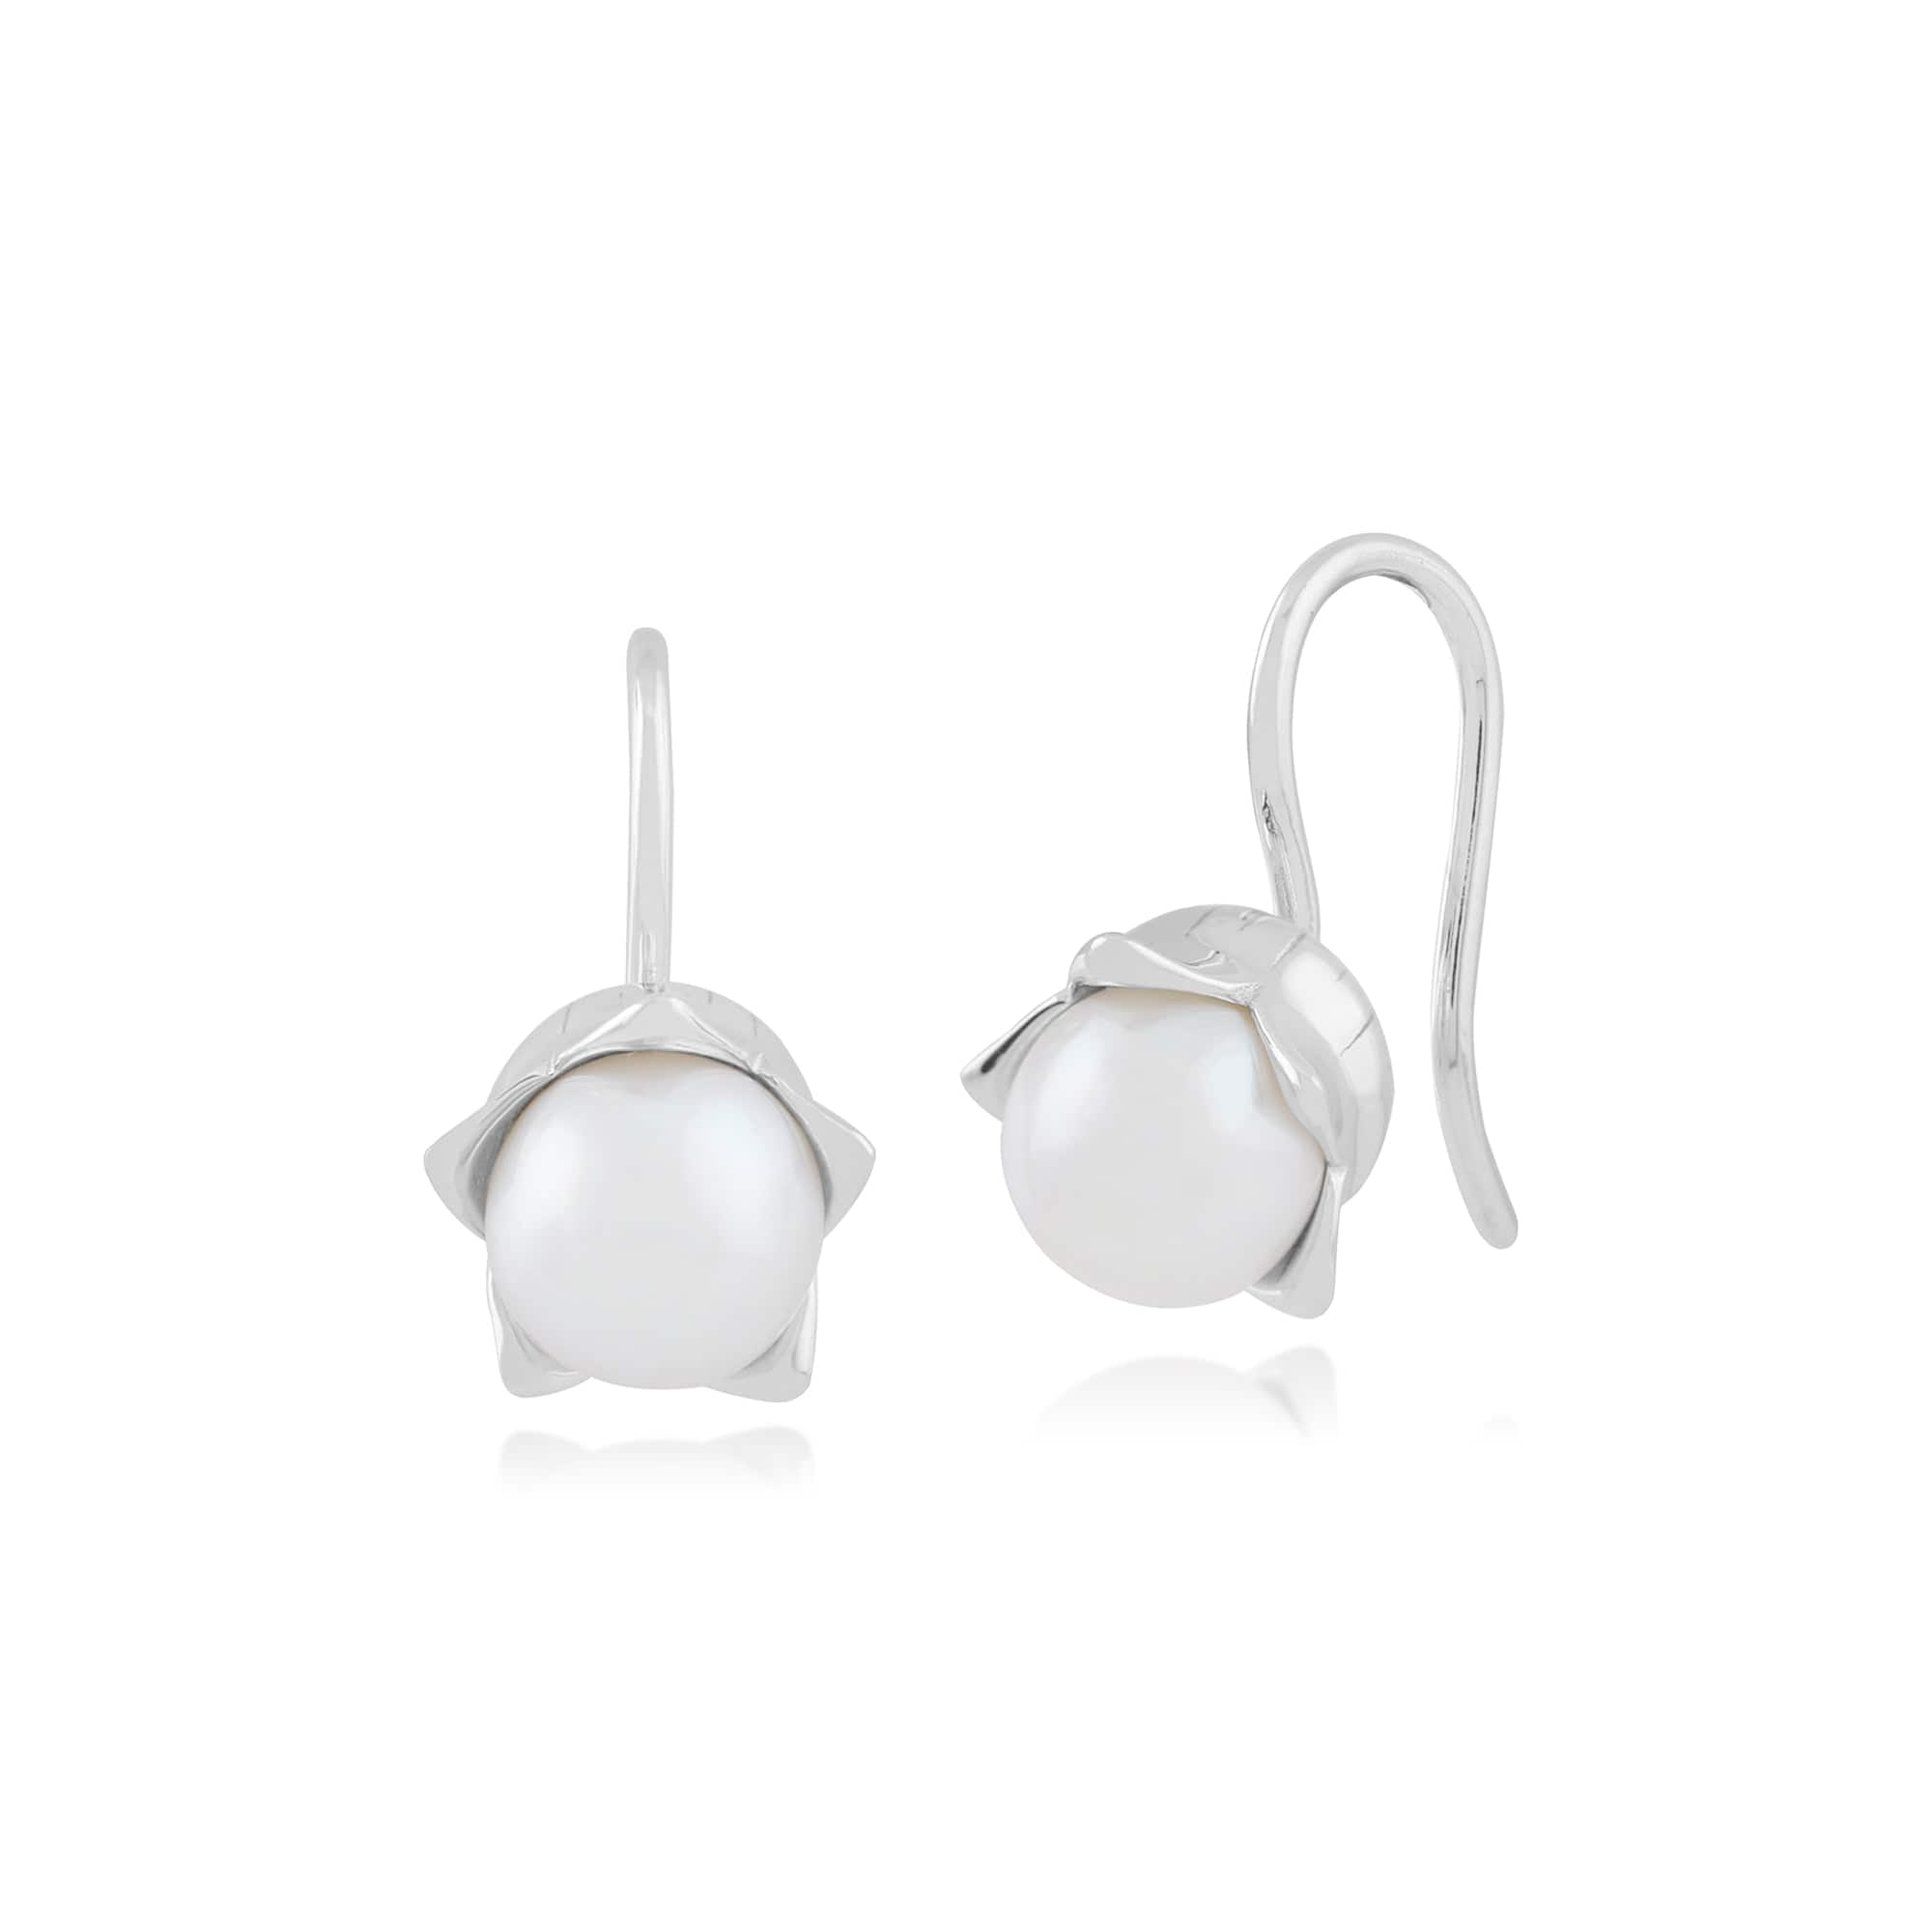 Floral Pearl Lily Drop Earrings in 925 Sterling Silver